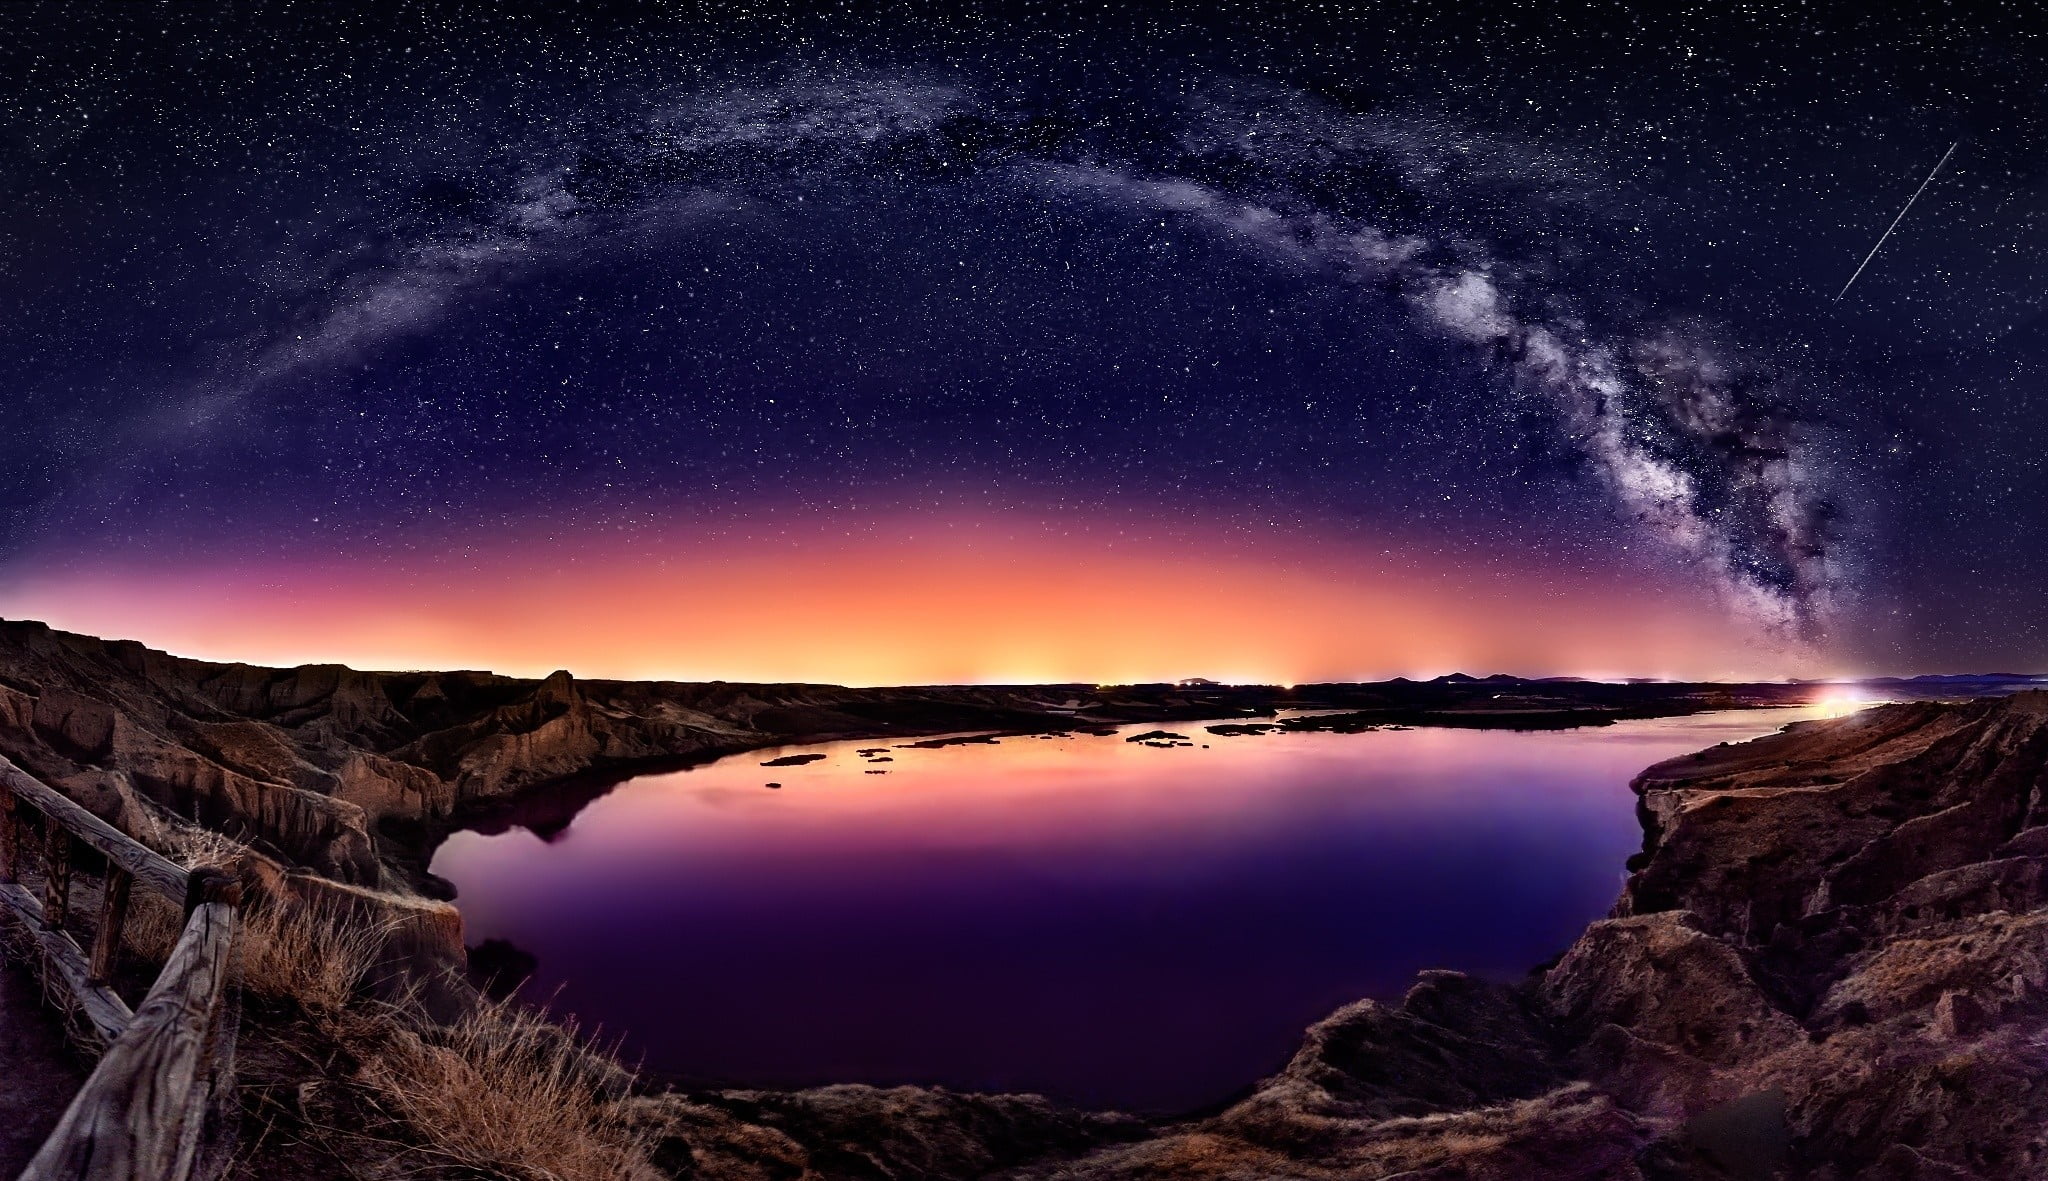 body of water under starry sky painting, long exposure, galaxy, Milky Way, starry night